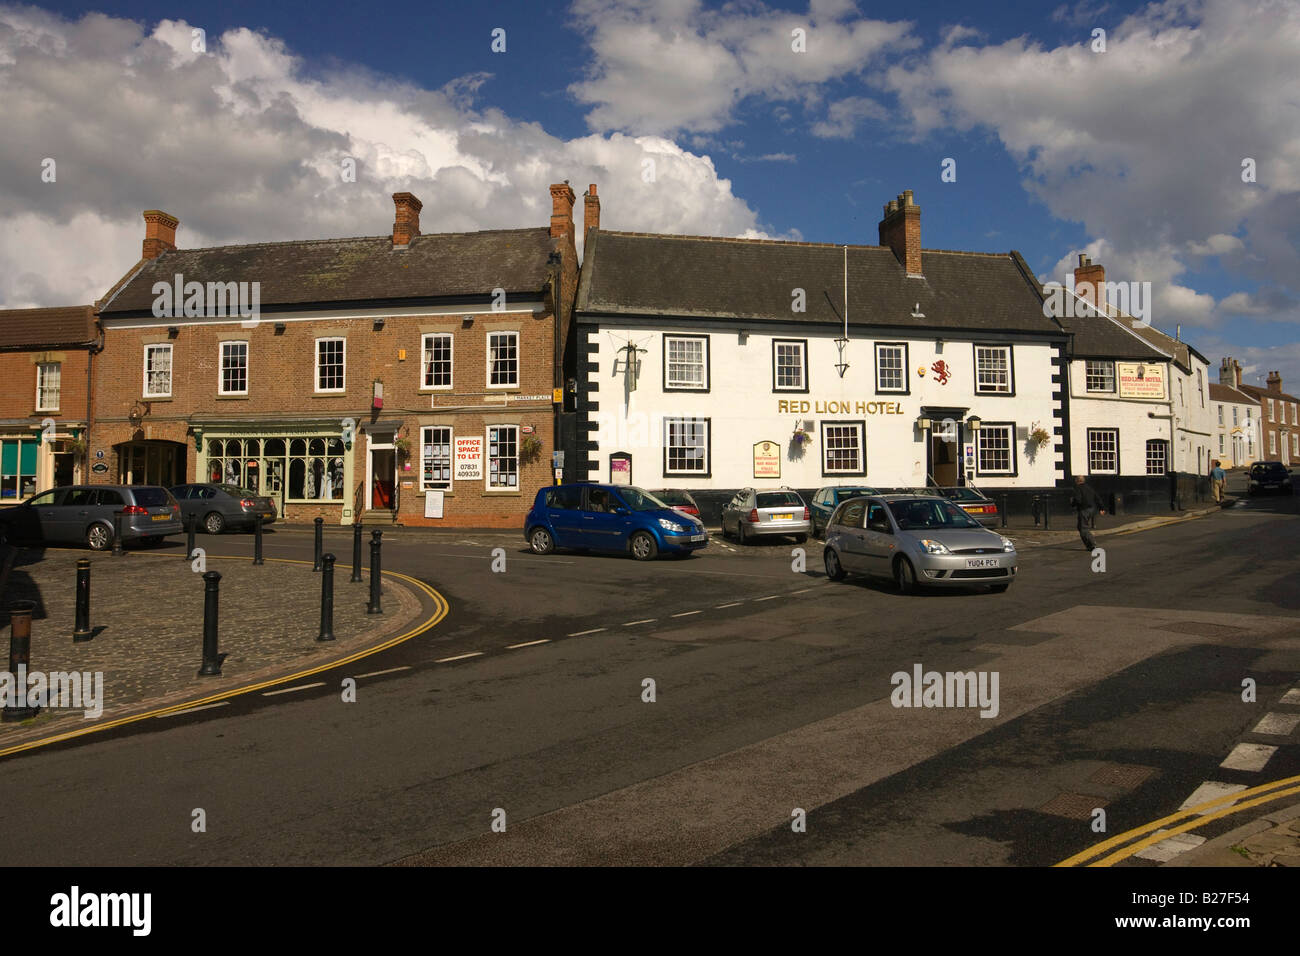 Red Lion Hotel in Epworth town centre in North Lincolnshire, UK Stock Photo